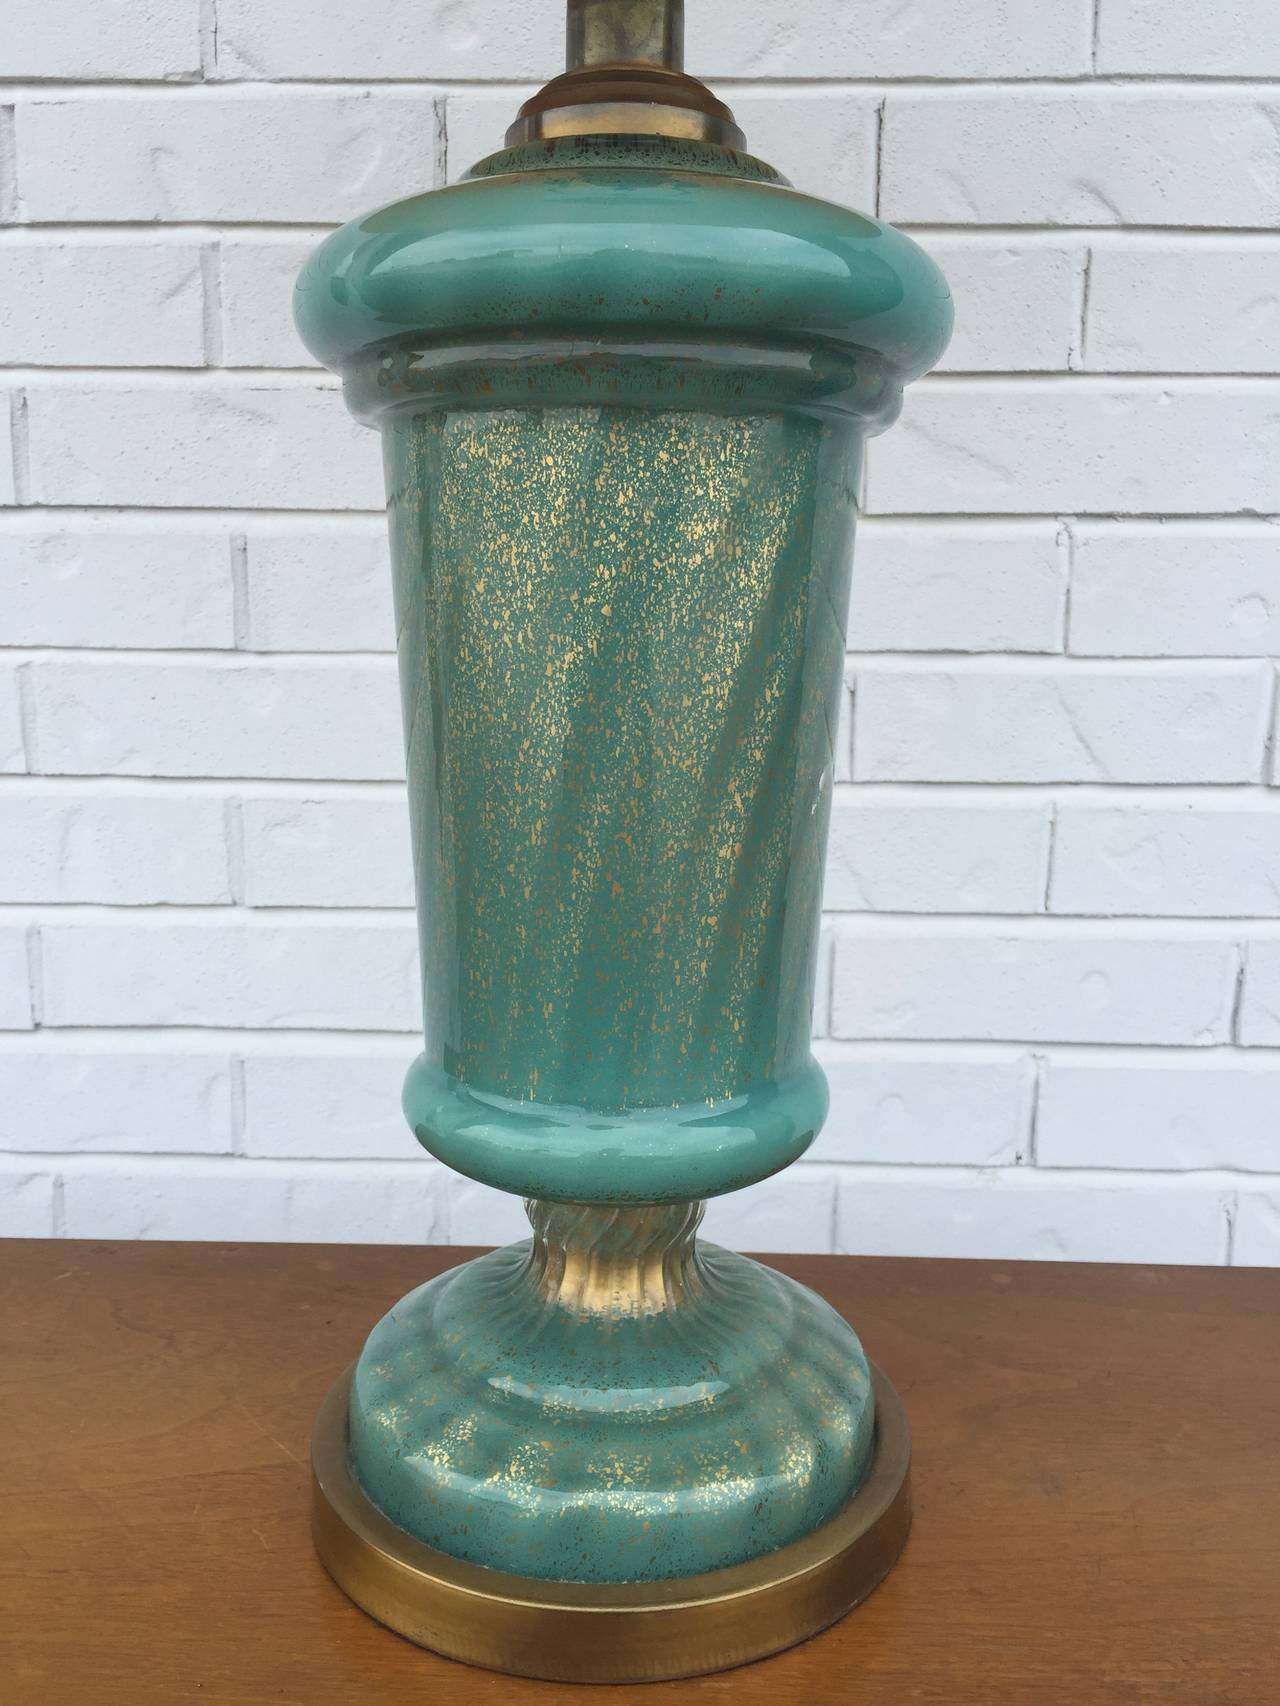 Gorgeous aqua Murano glass lamp with gold flecks in neoclassical urn shape and brass base. Paul Hansen label, shade not included.